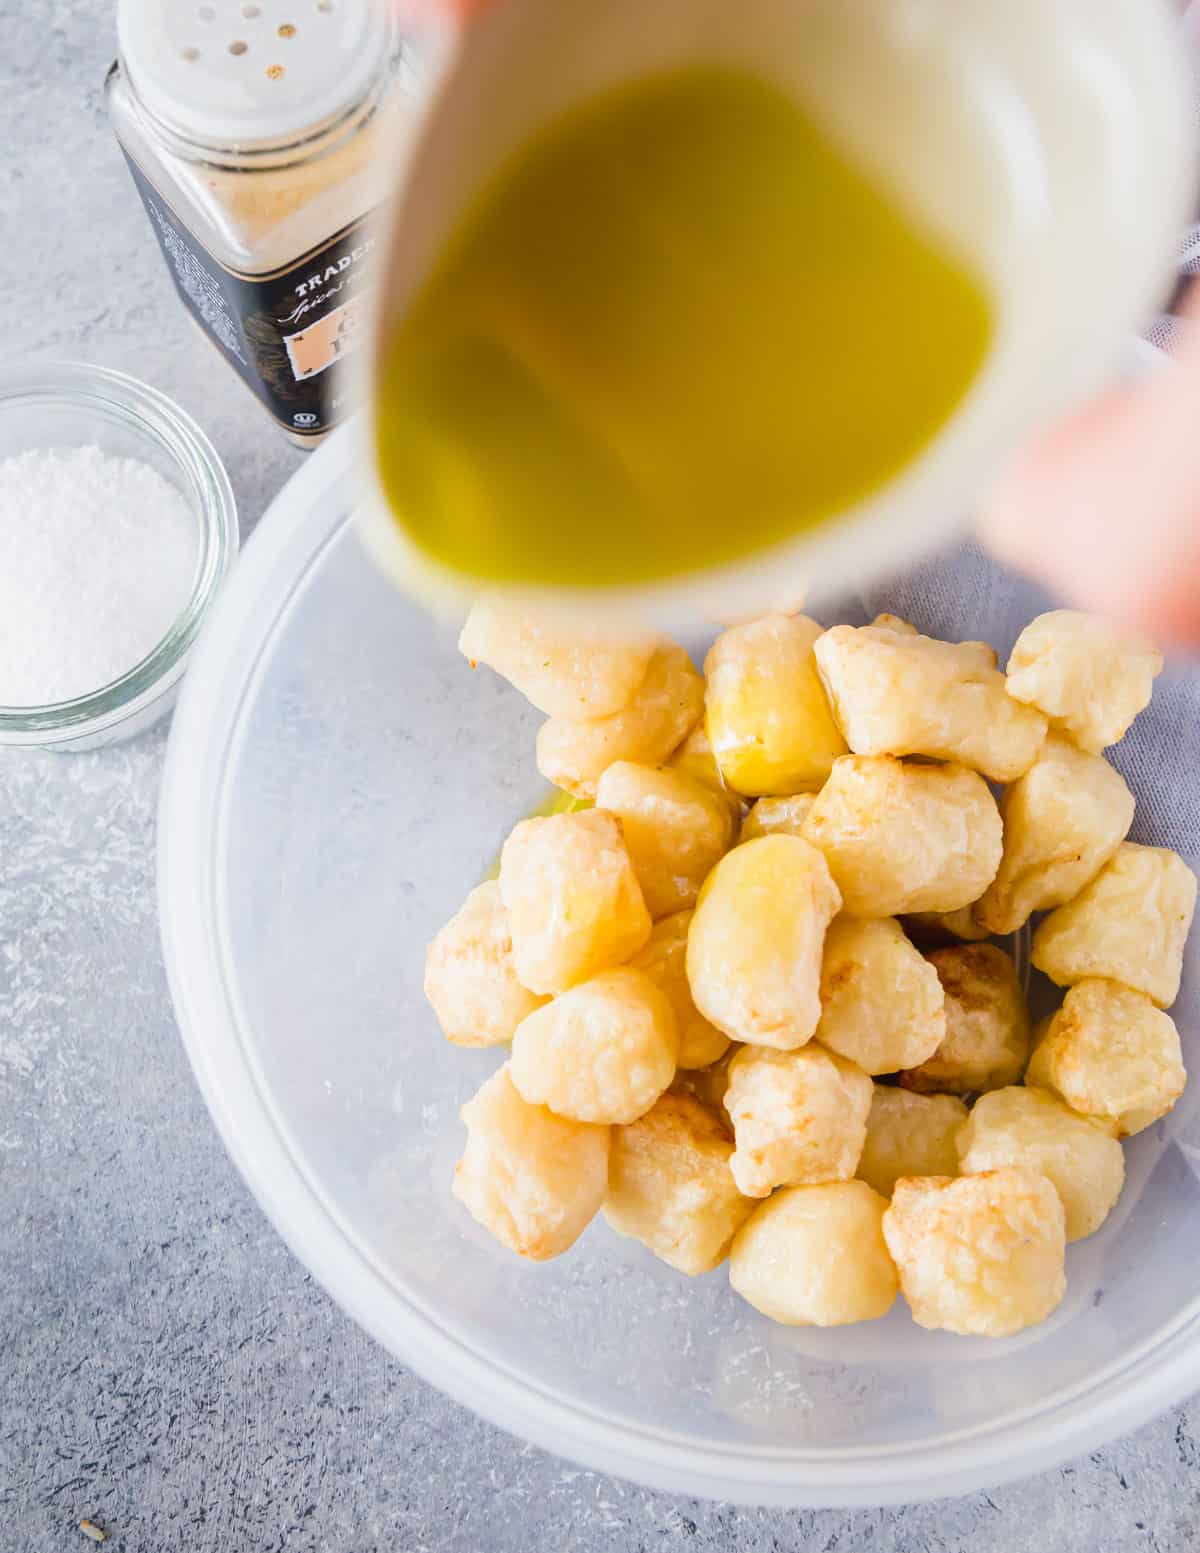 After air frying, cauliflower gnocchi can be enjoyed as a simple main dish by tossing with olive oil, garlic powder and salt.